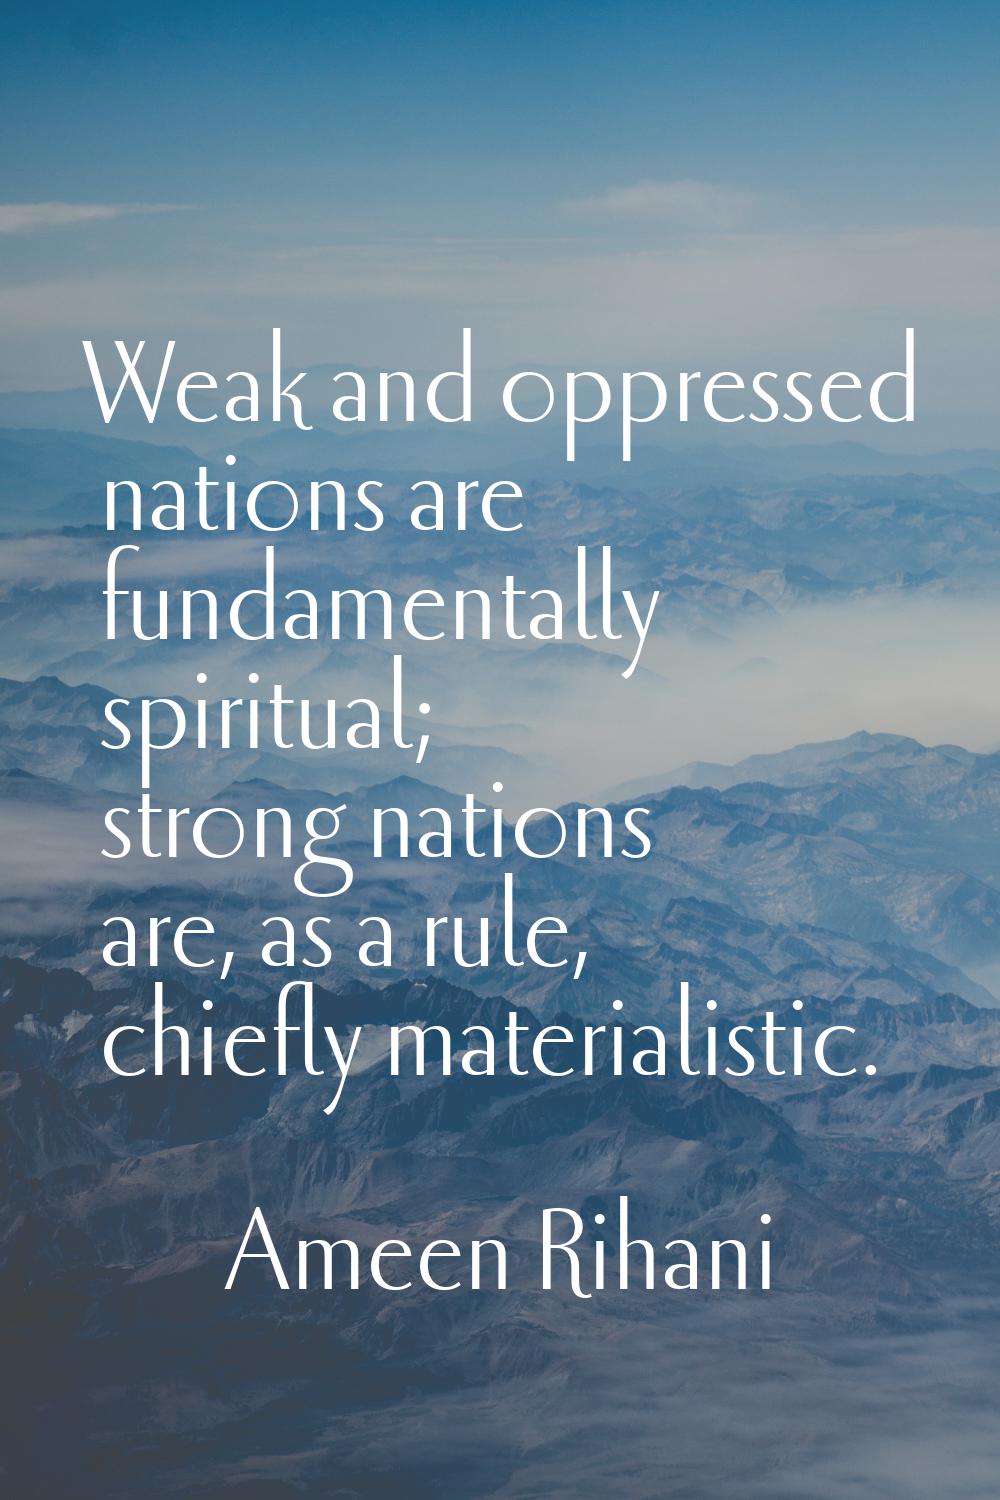 Weak and oppressed nations are fundamentally spiritual; strong nations are, as a rule, chiefly mate